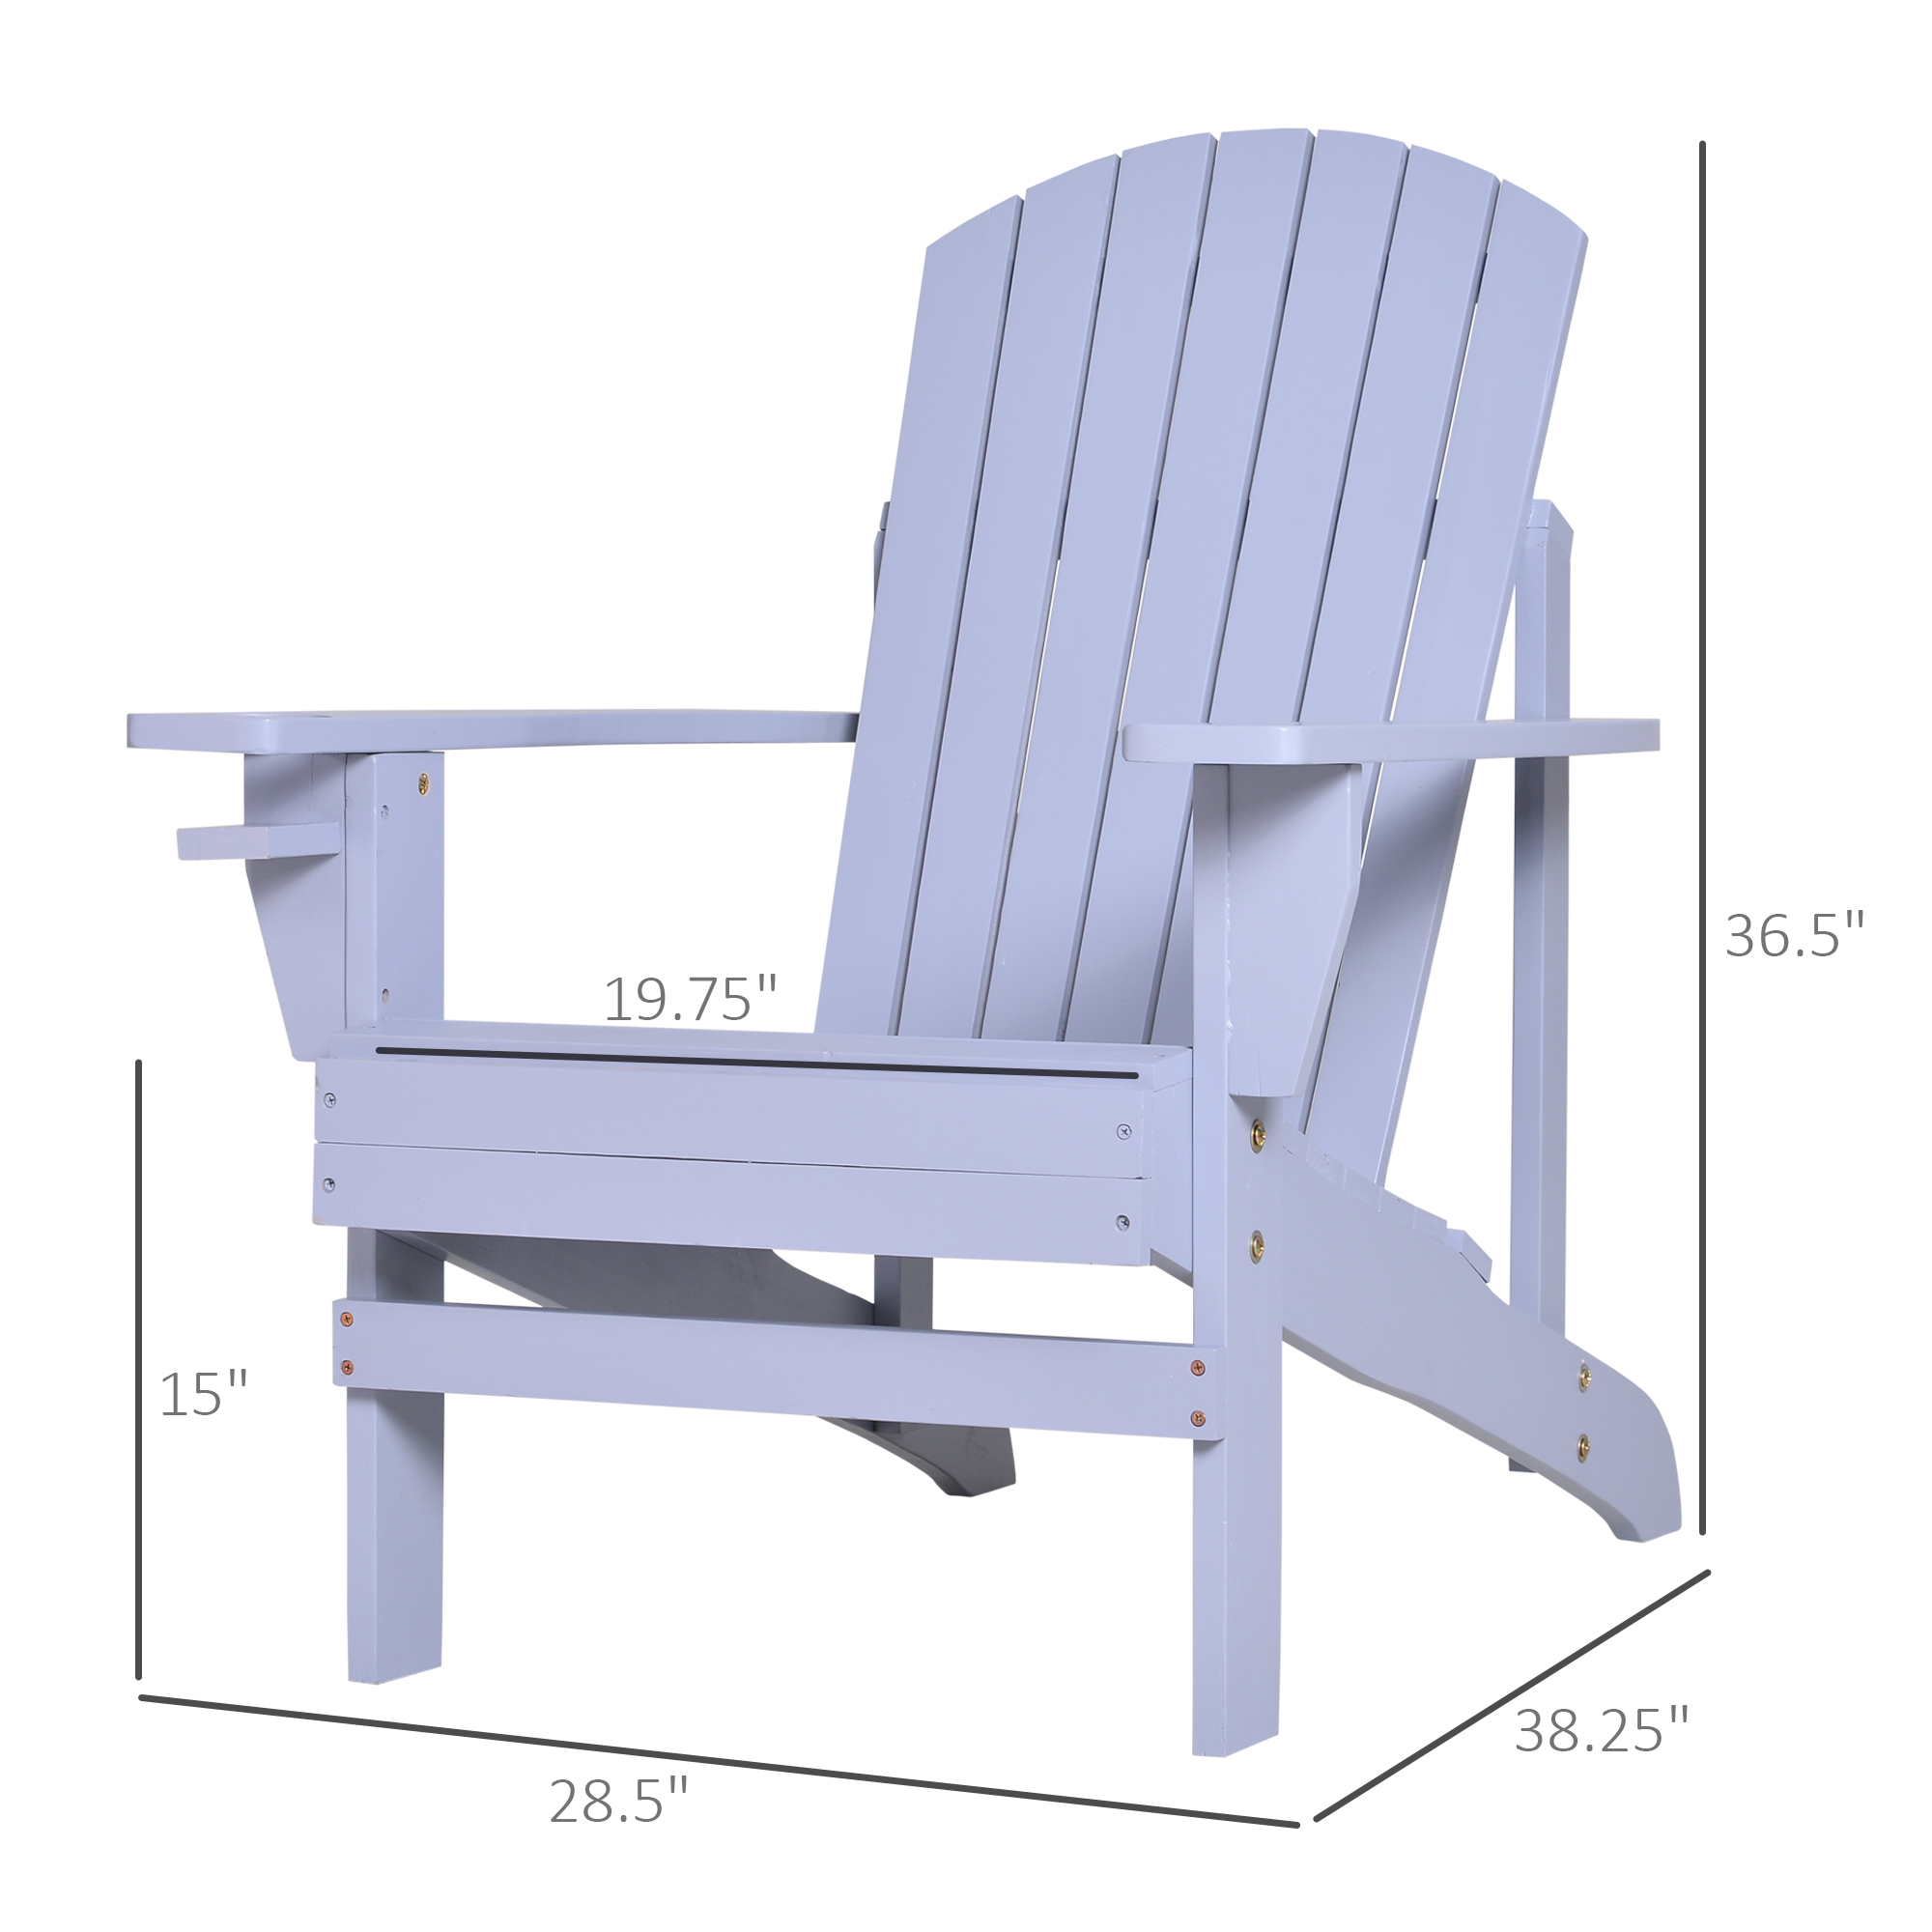 Outsunny Wooden Adirondack Chair, Outdoor Patio Lawn Chair with Cup Holder, Weather Resistant Lawn Furniture, Classic Lounge for Deck, Garden, Backyard, Fire Pit, Gray - image 9 of 9